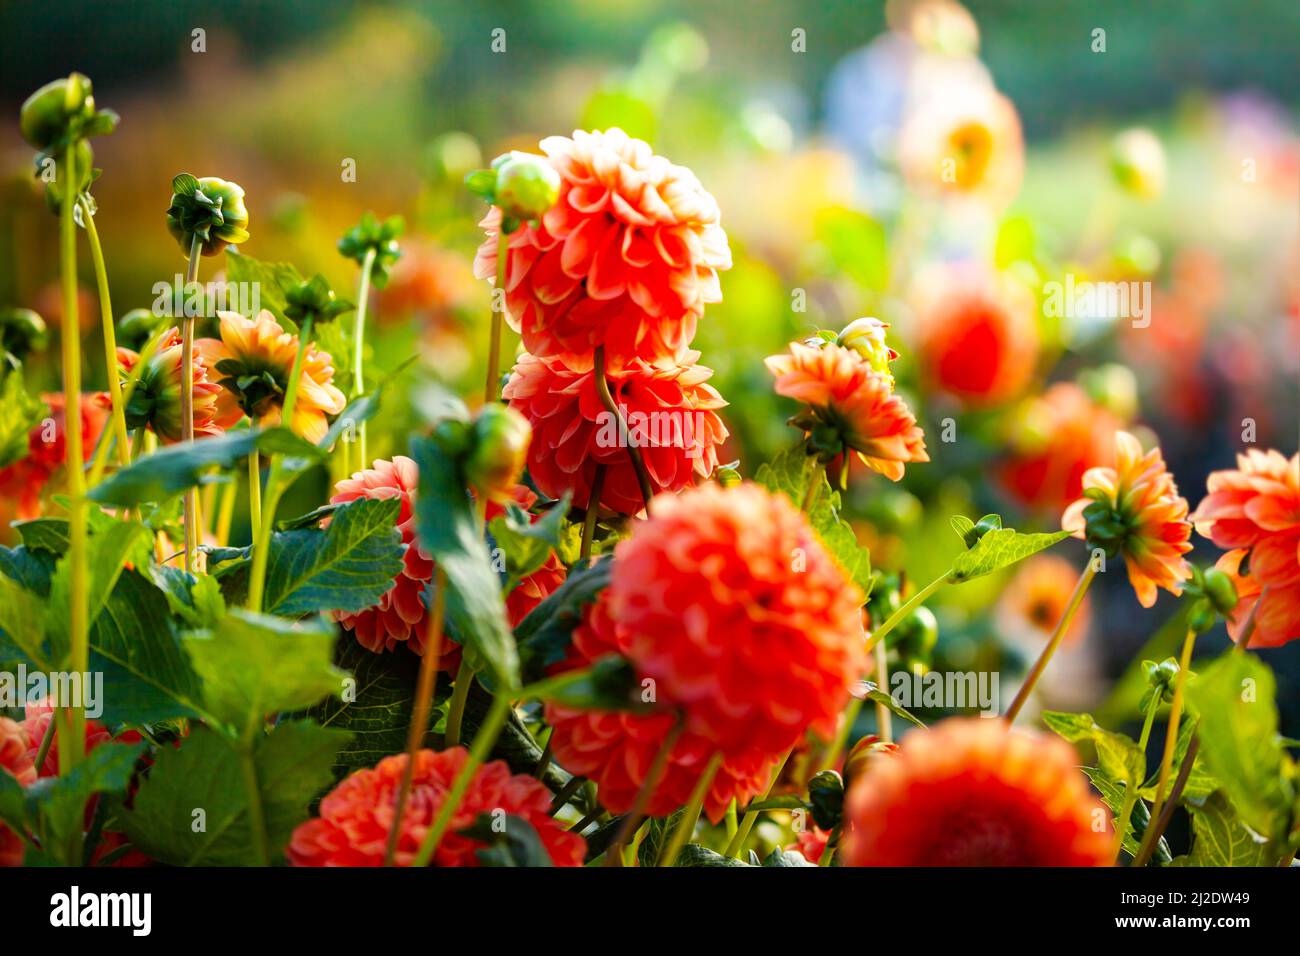 Different red dahlia flowers in the garden flowerbed Stock Photo